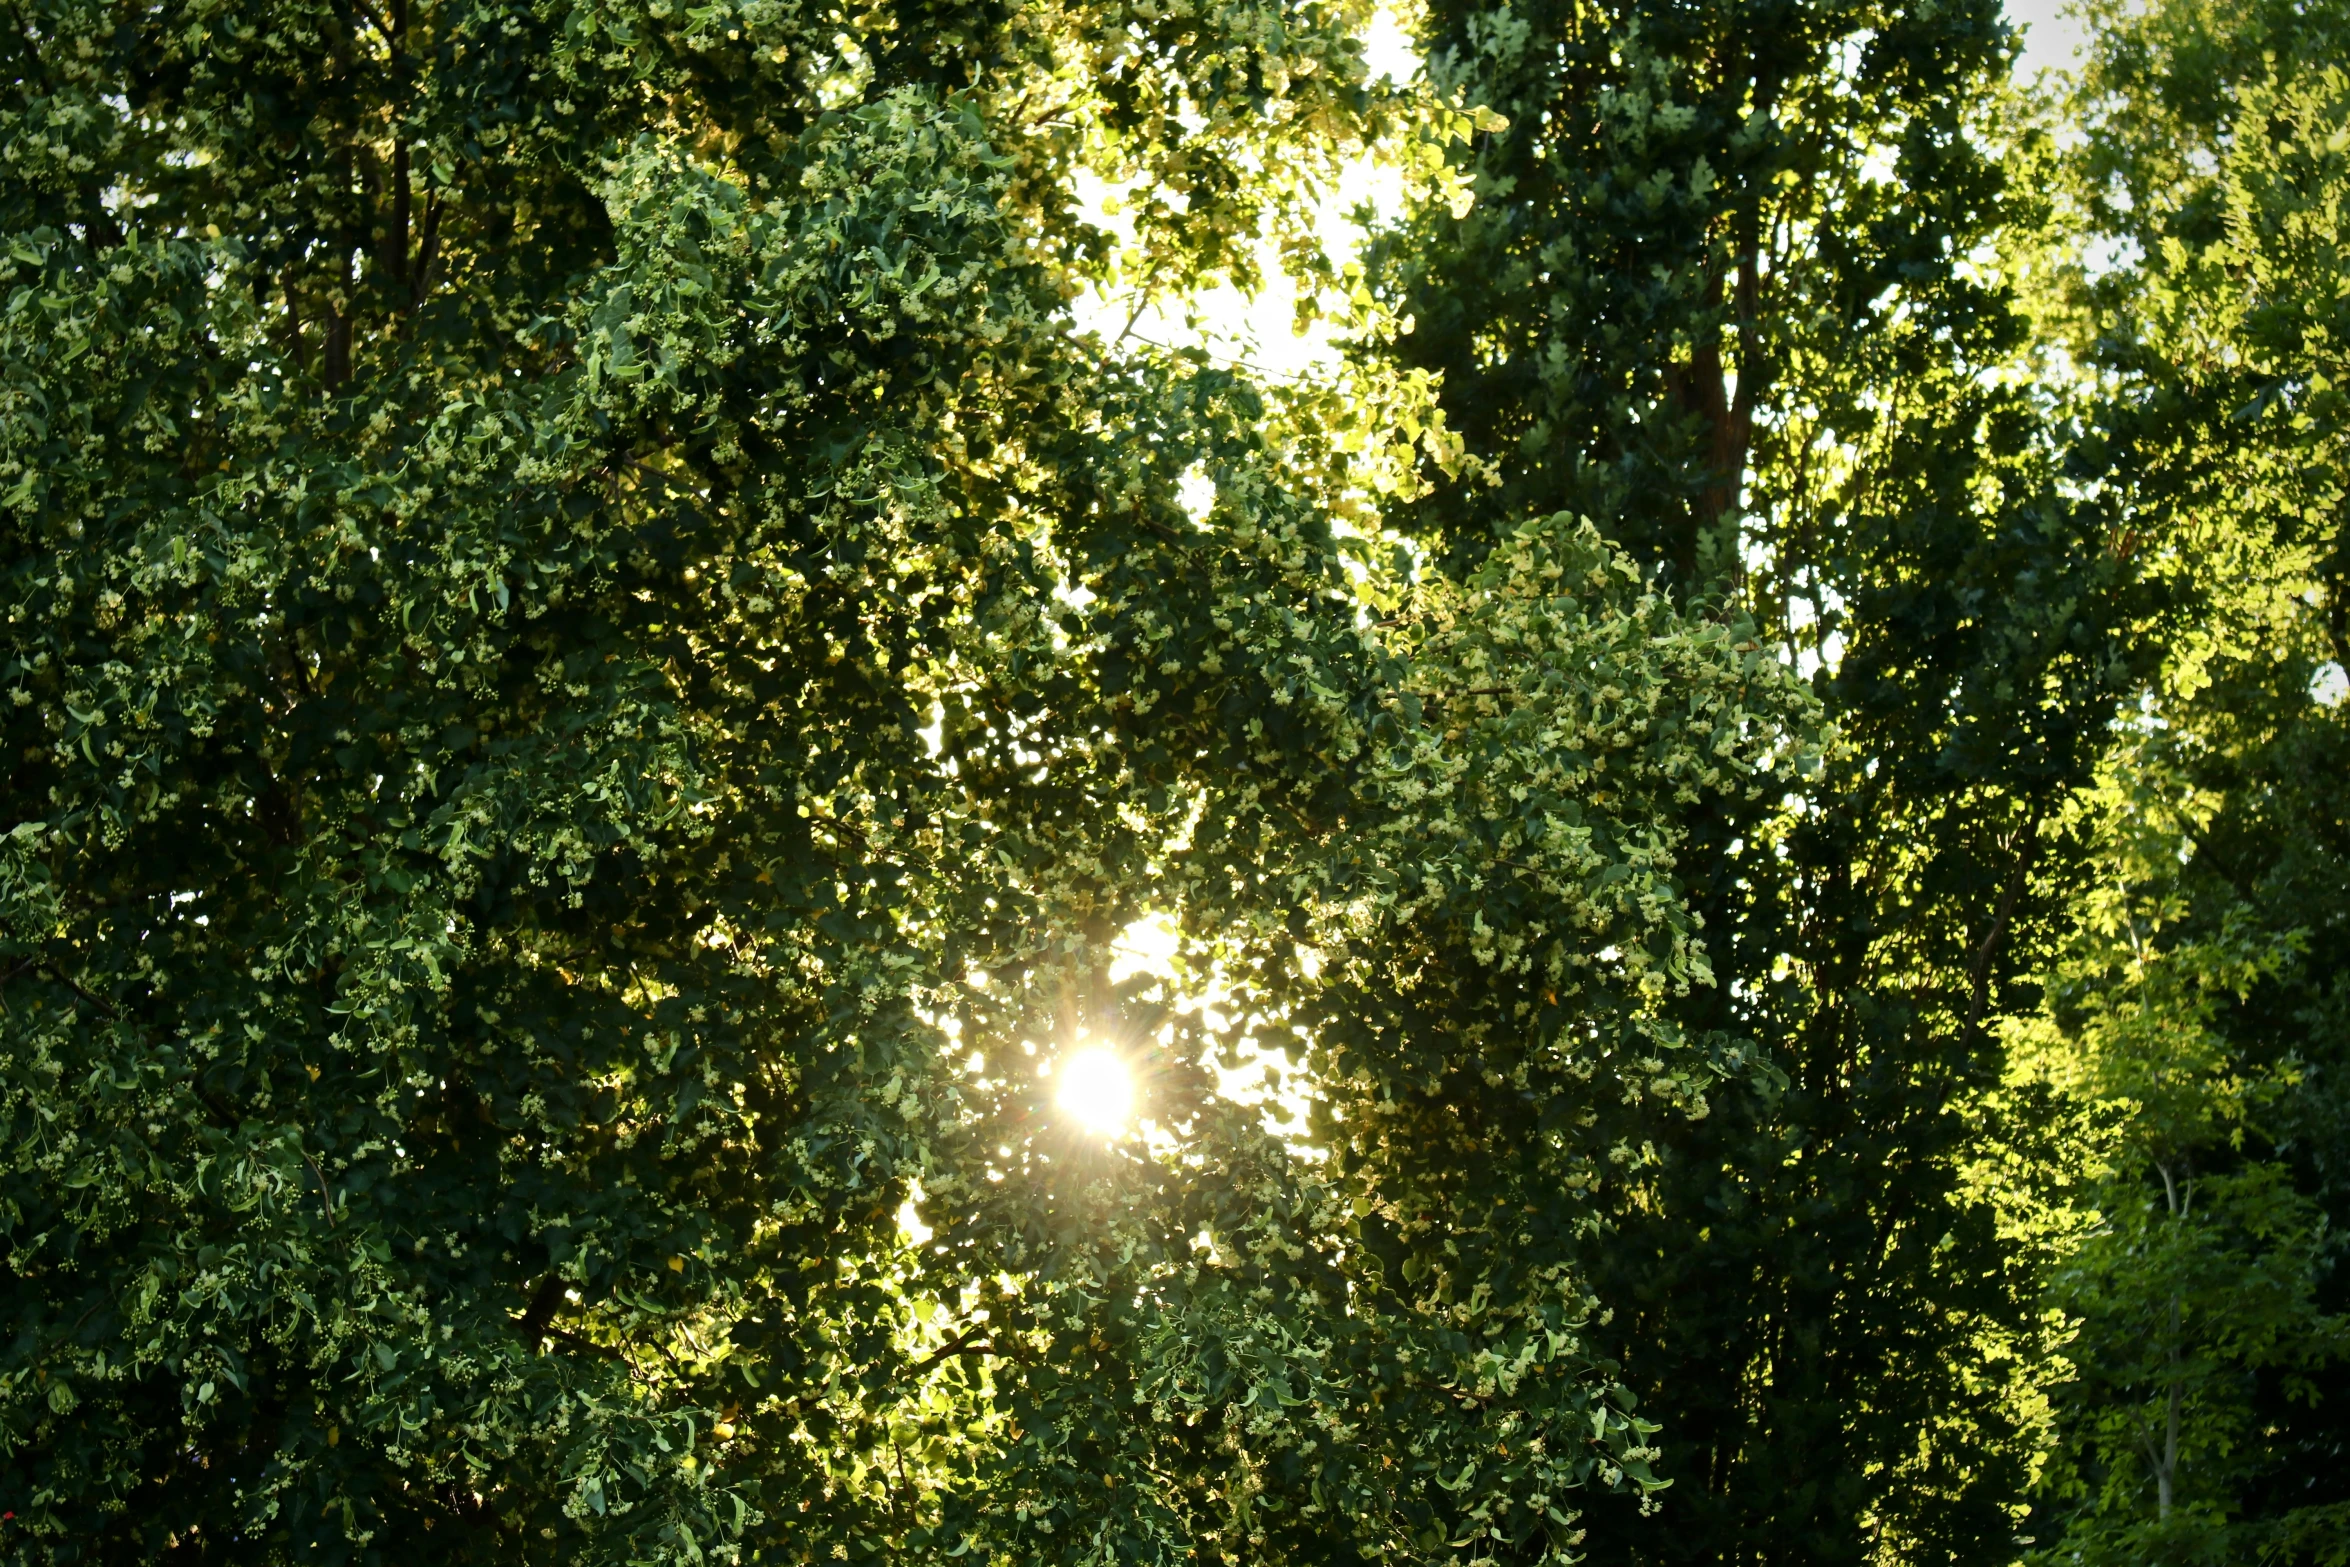 the sun peeking through a green forest full of leaves